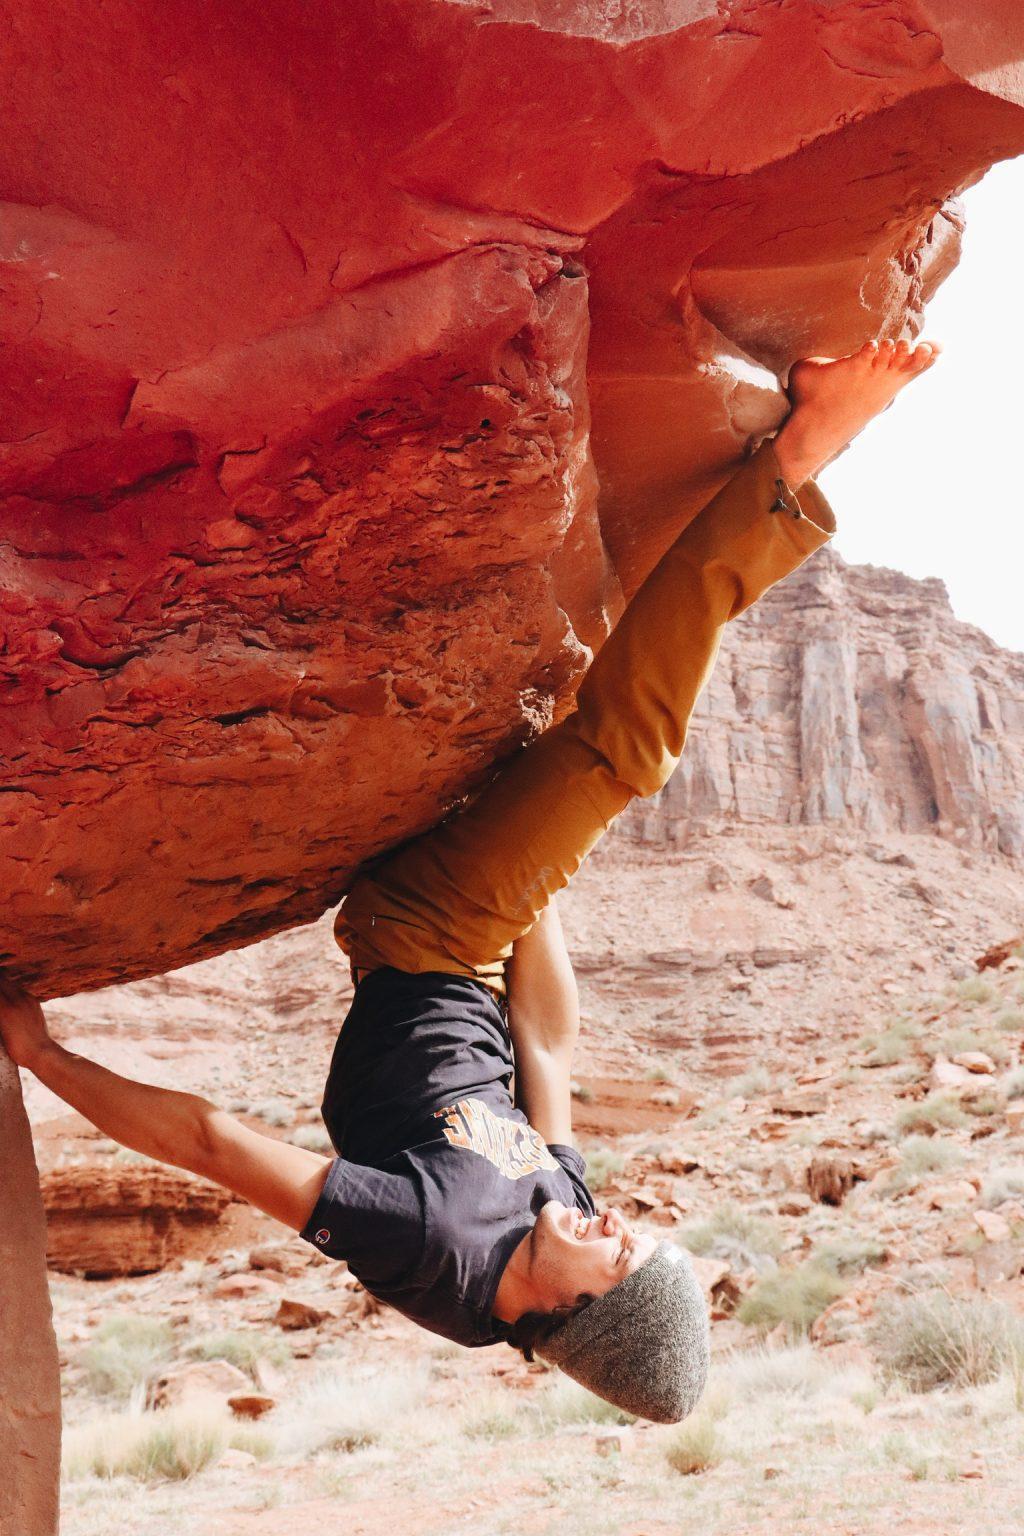 Climbing Club President junior John Palmer contorts his body upside-down on a bouldering route near Moab, Utah in April, 2021. Palmer has been president of Climbing Club since Fall 2021. Photo by Sammie Wuensche